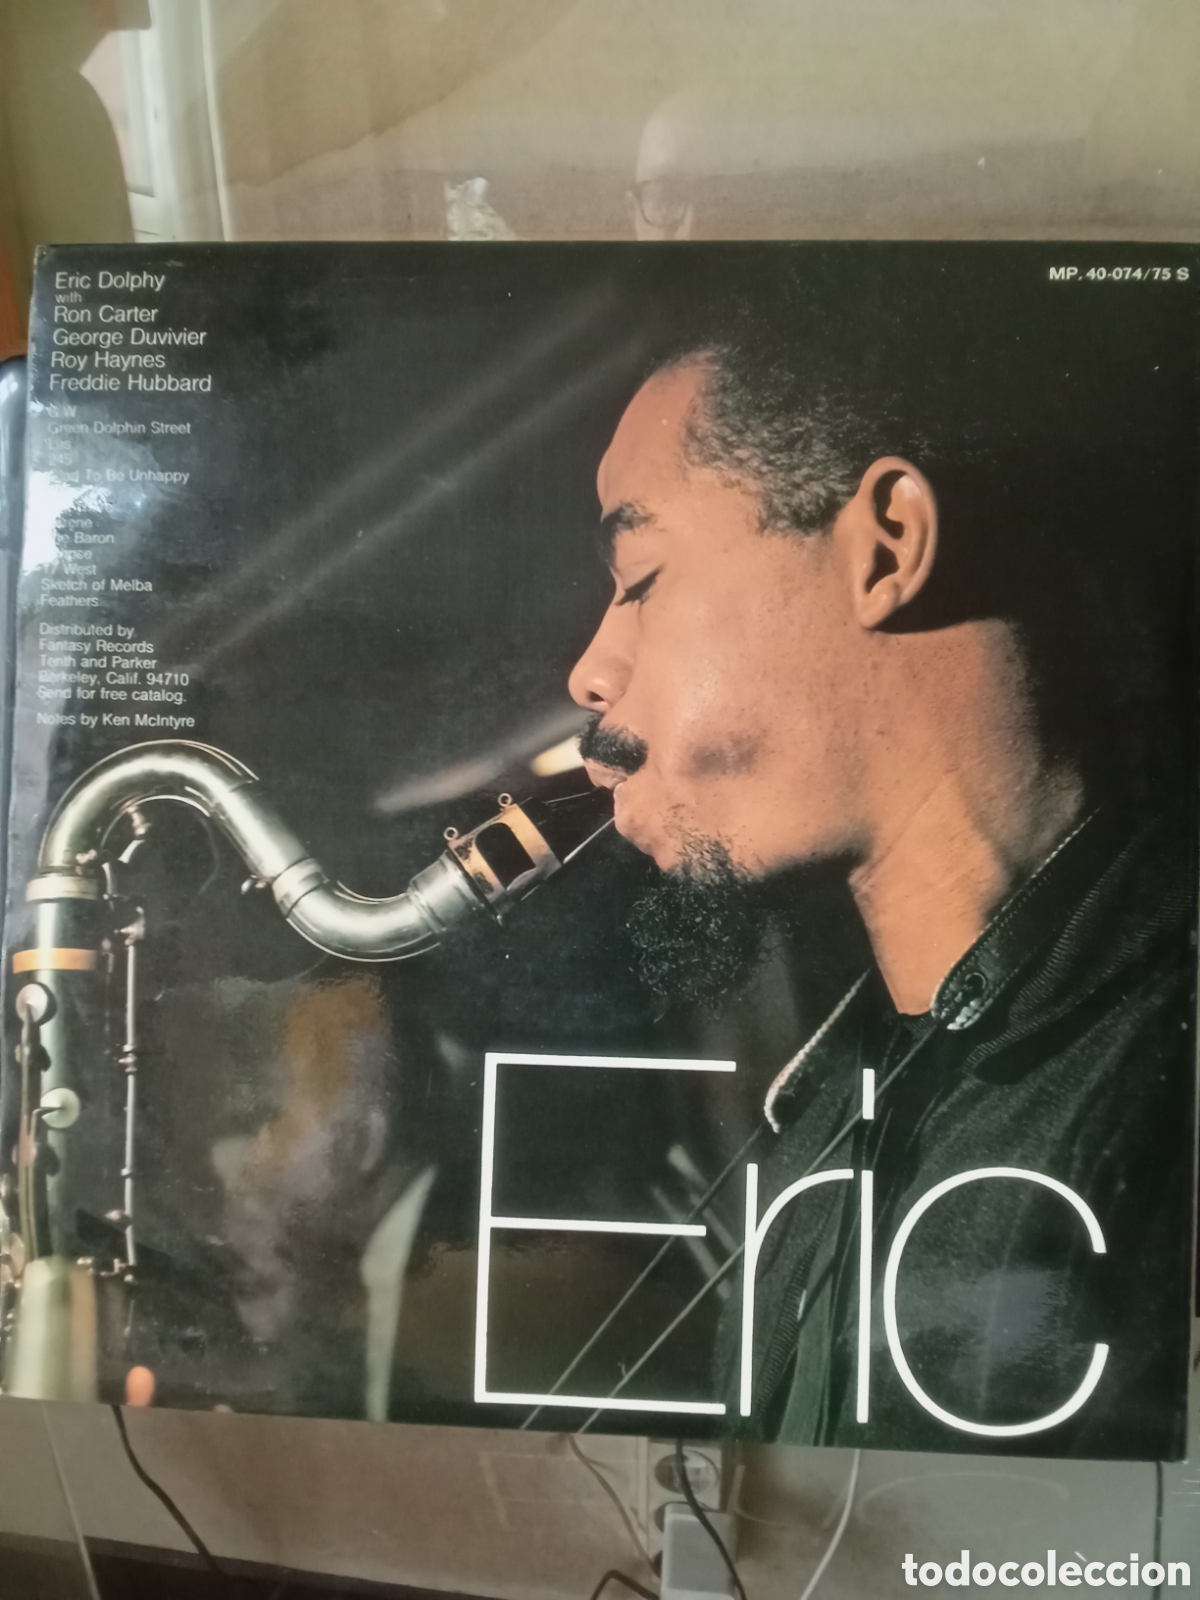 eric dolphy doble lp ,”outwar boun ” ” out th Buy LP vinyl records of  Jazz, Jazz-Rock, Blues and RB on todocoleccion